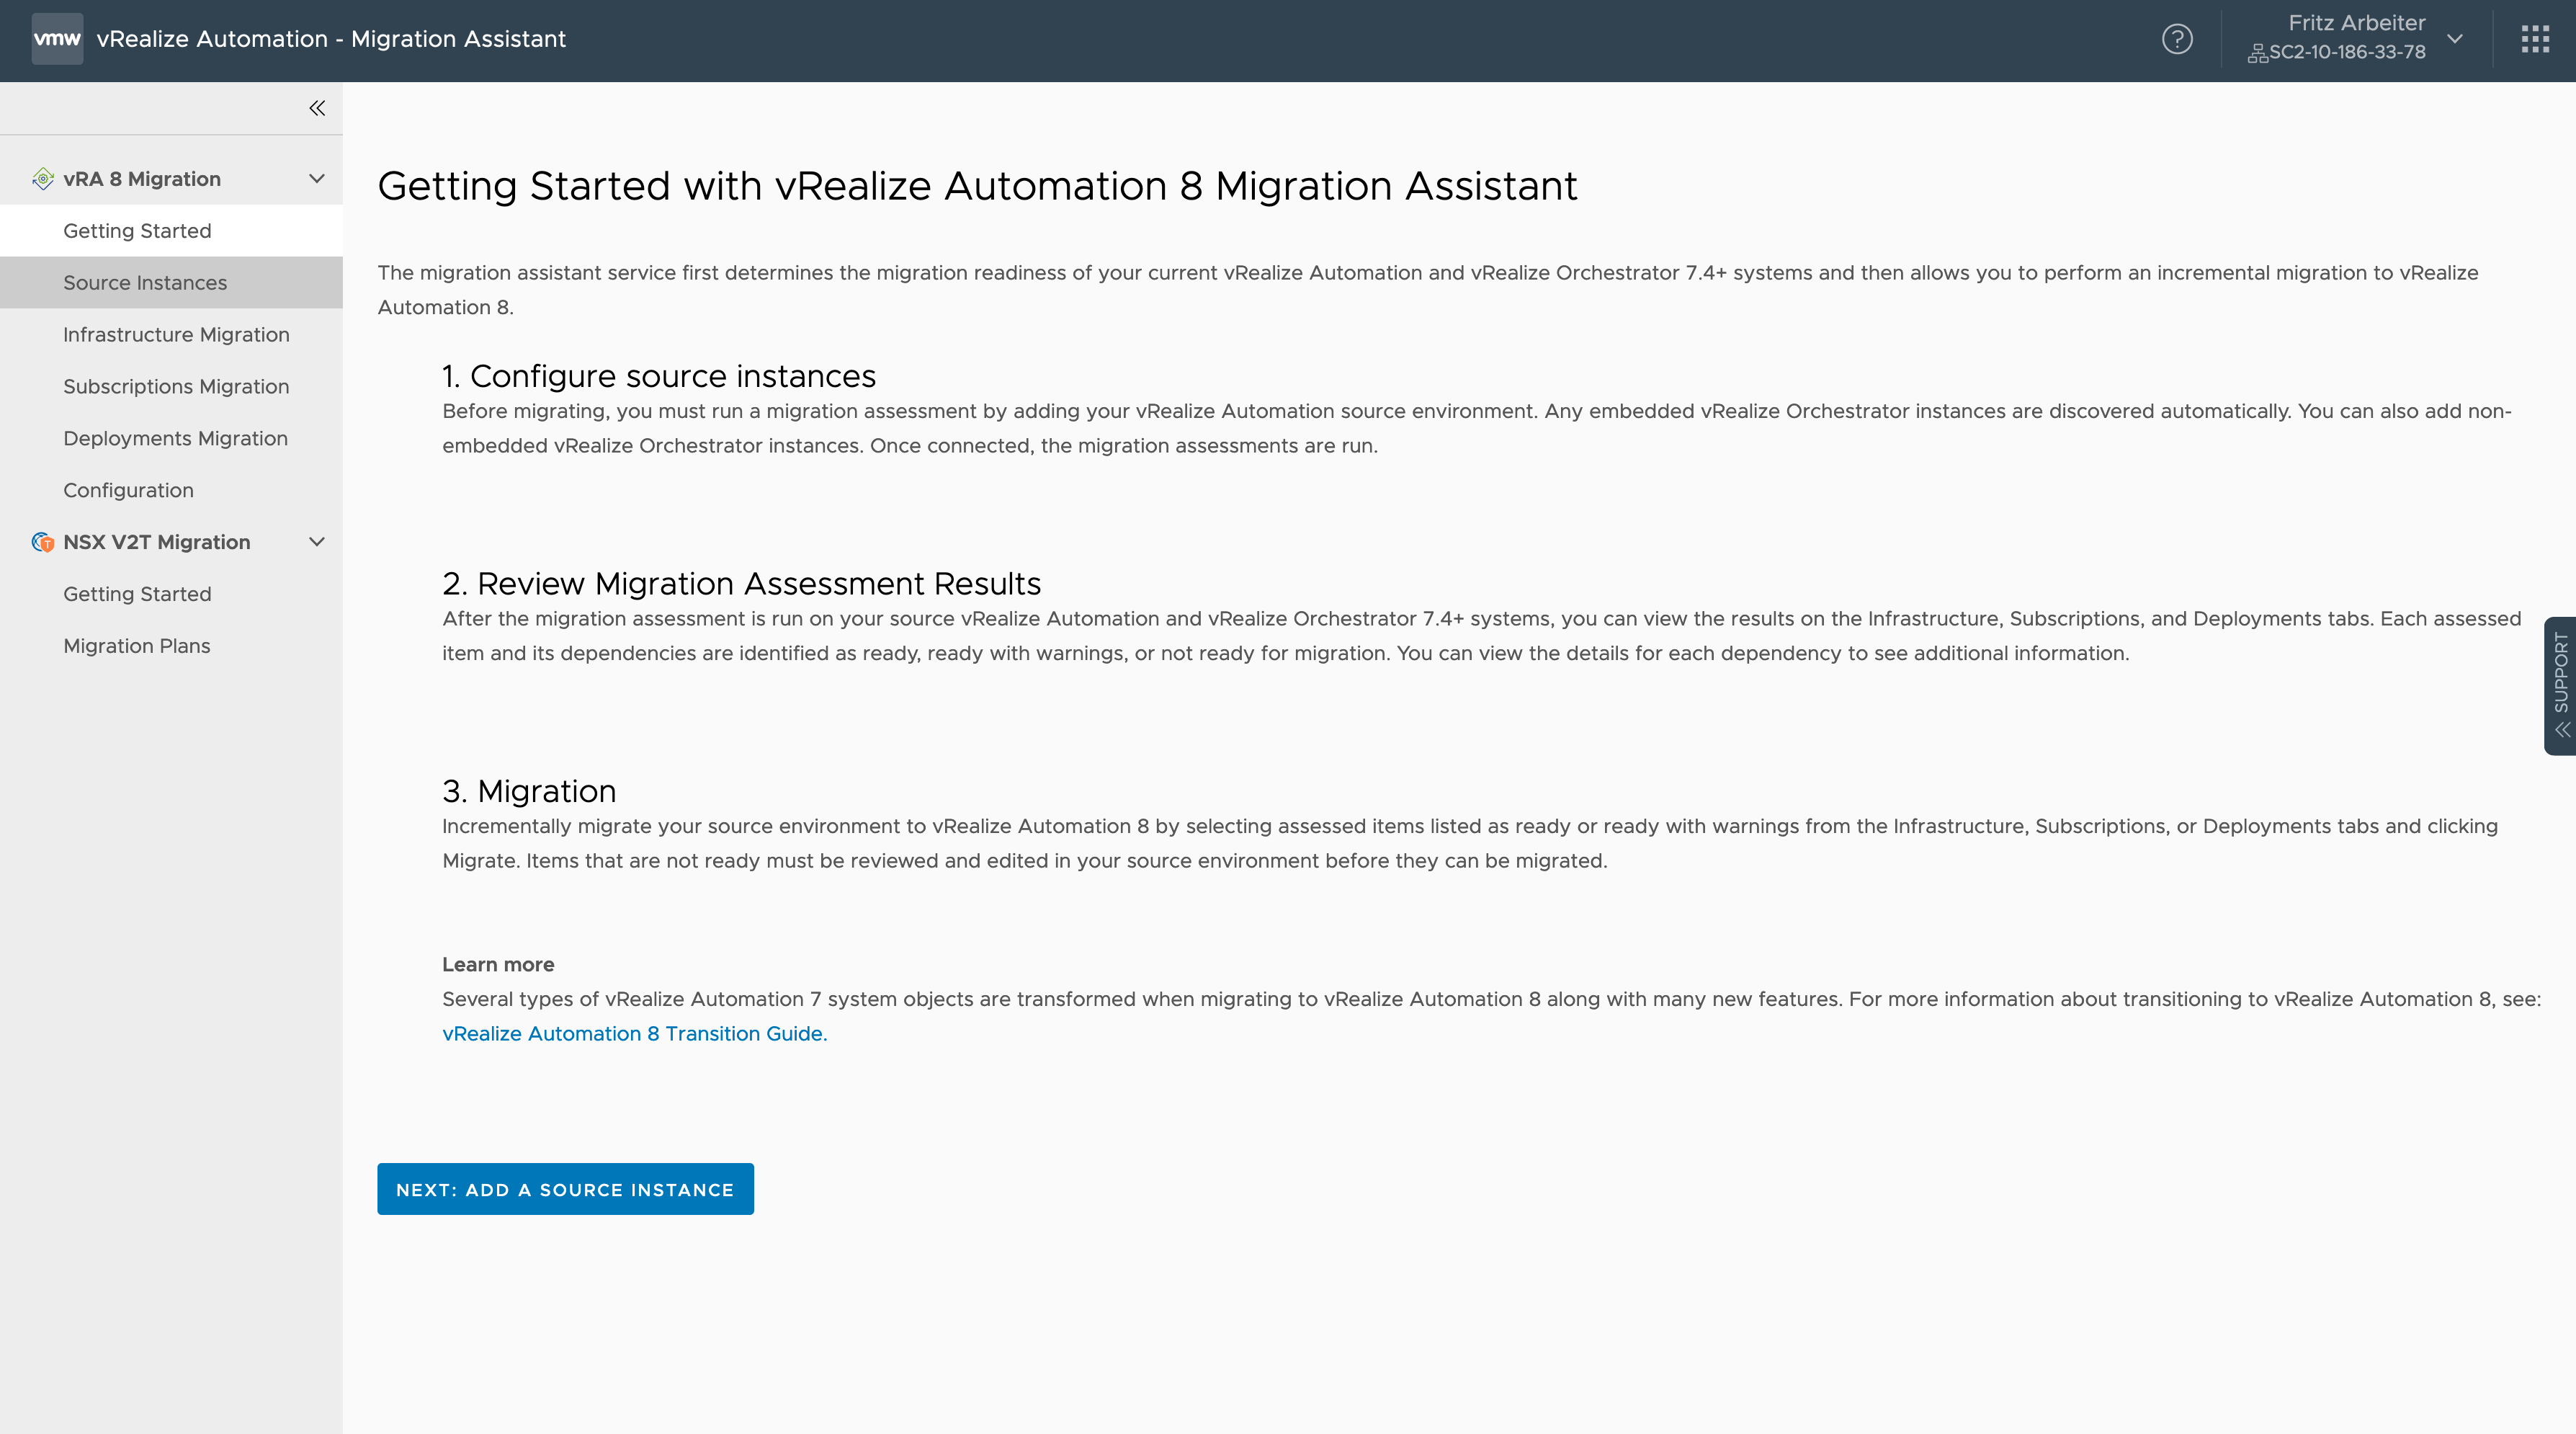 Migration Assistant Getting Started page